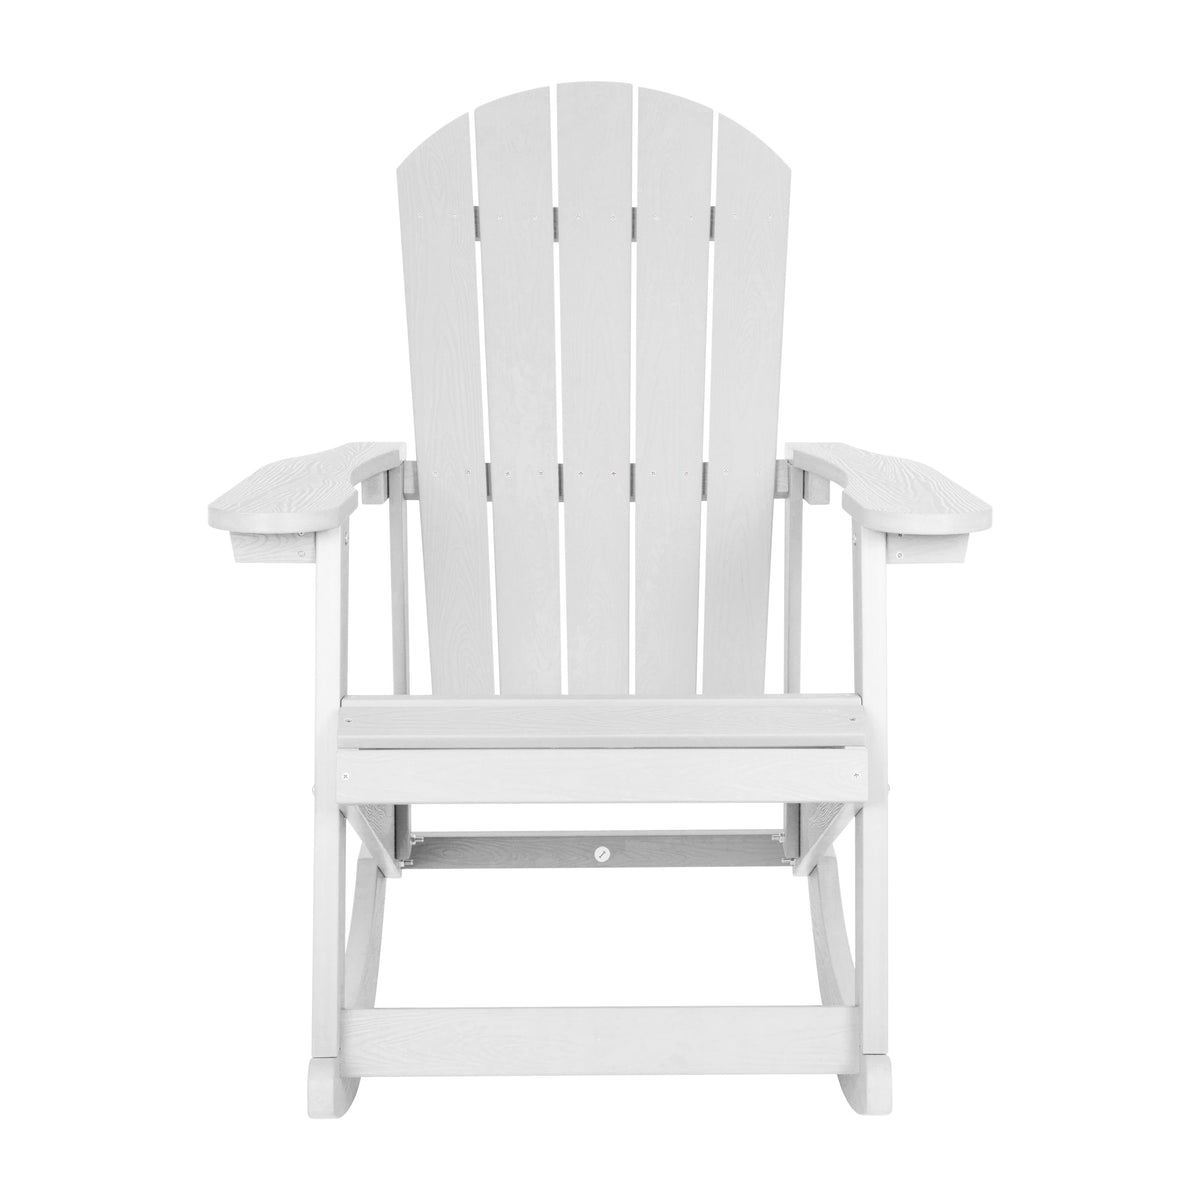 White |#| Adirondack Style Poly Resin Wood Rocking Chair for Indoor/Outdoor Use - White